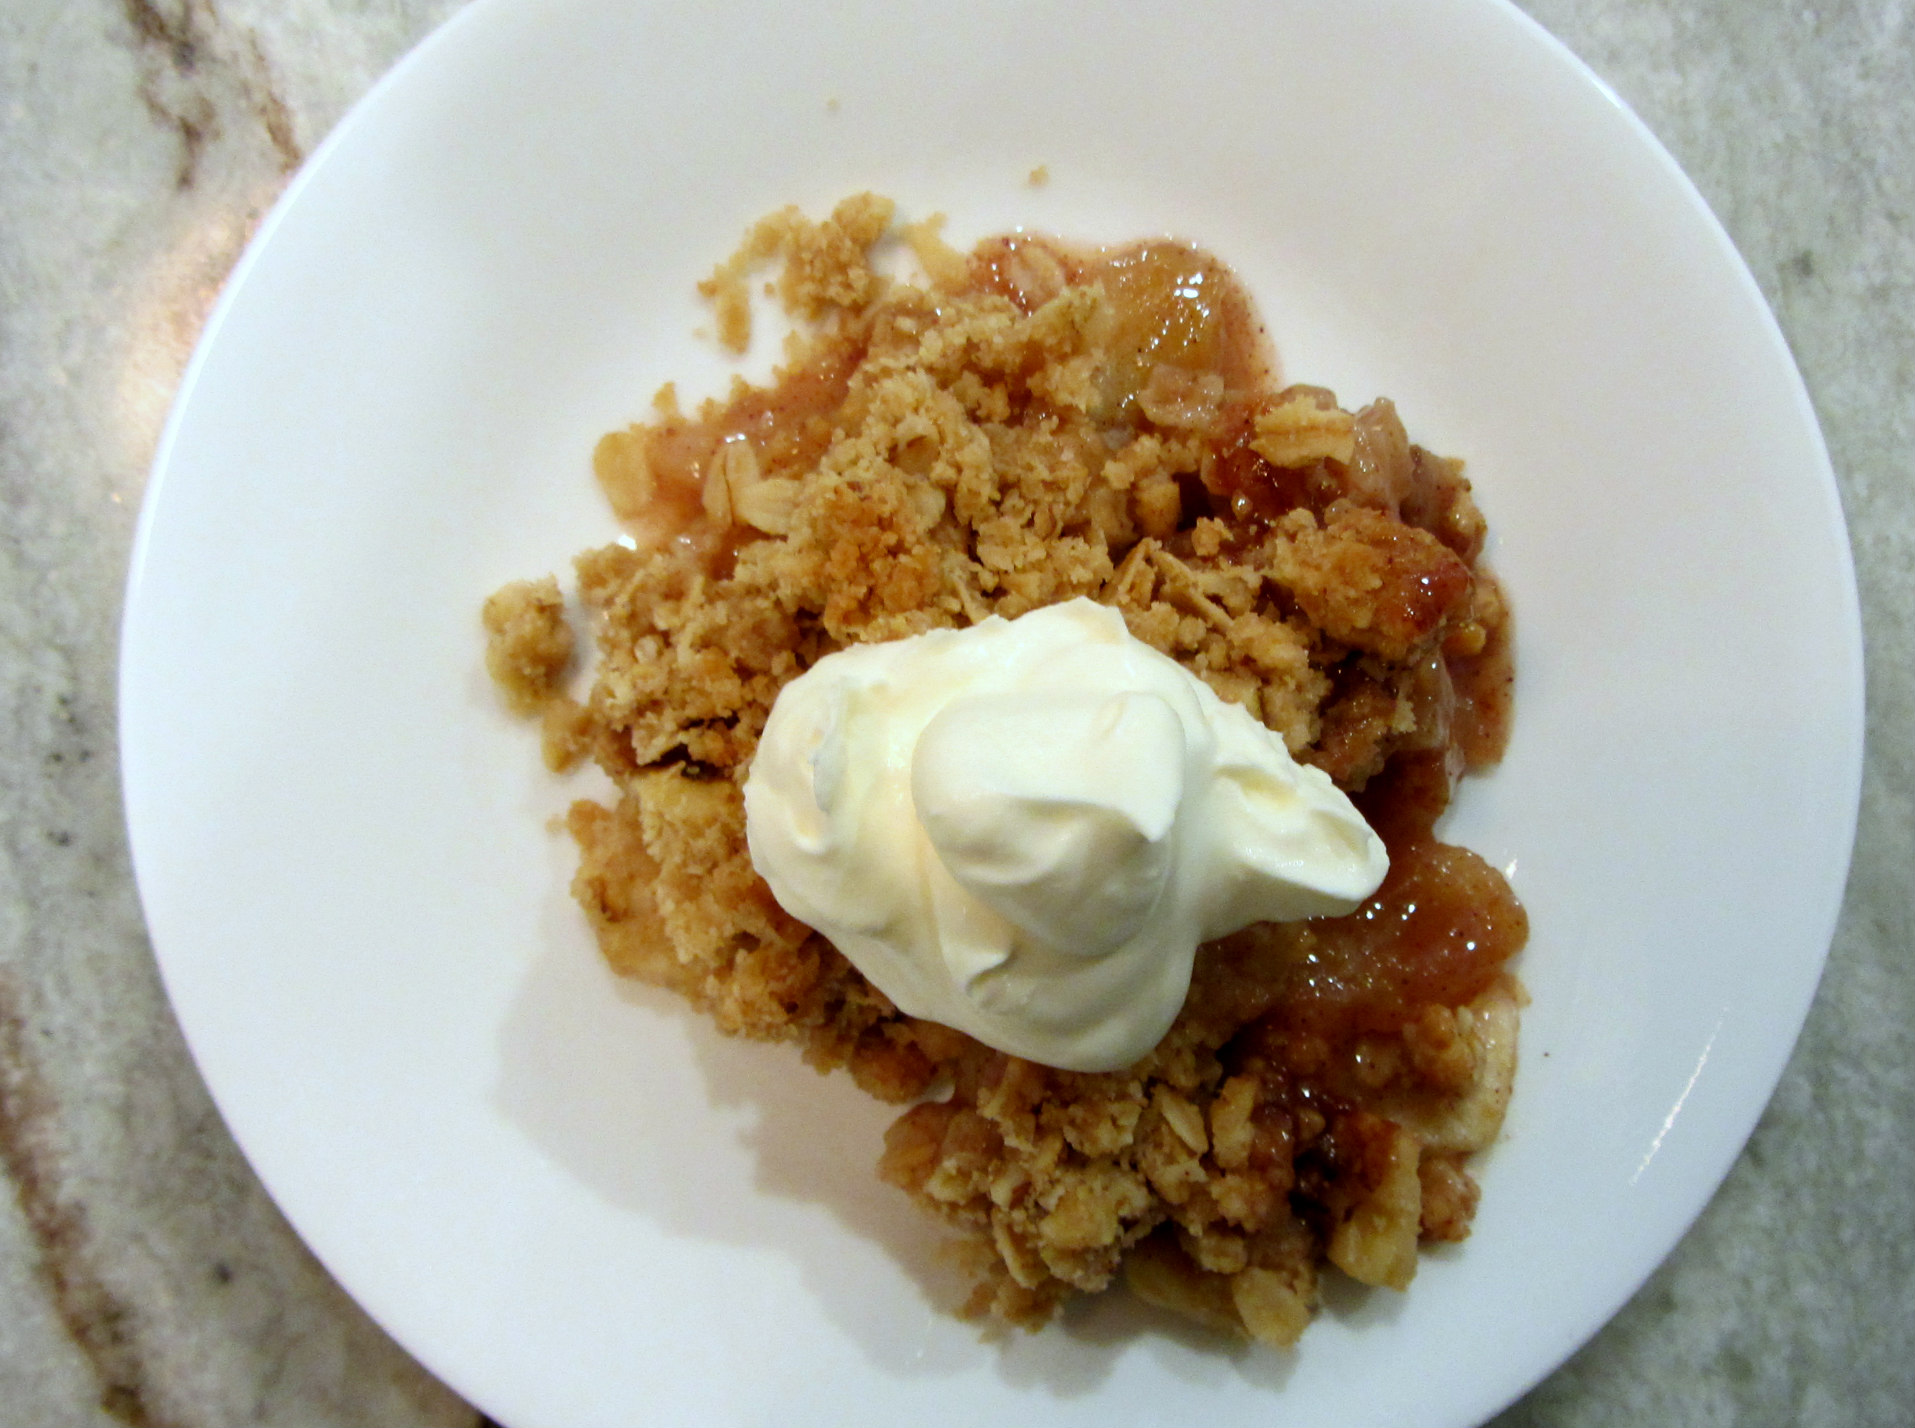 Apple crumble with whipped cream